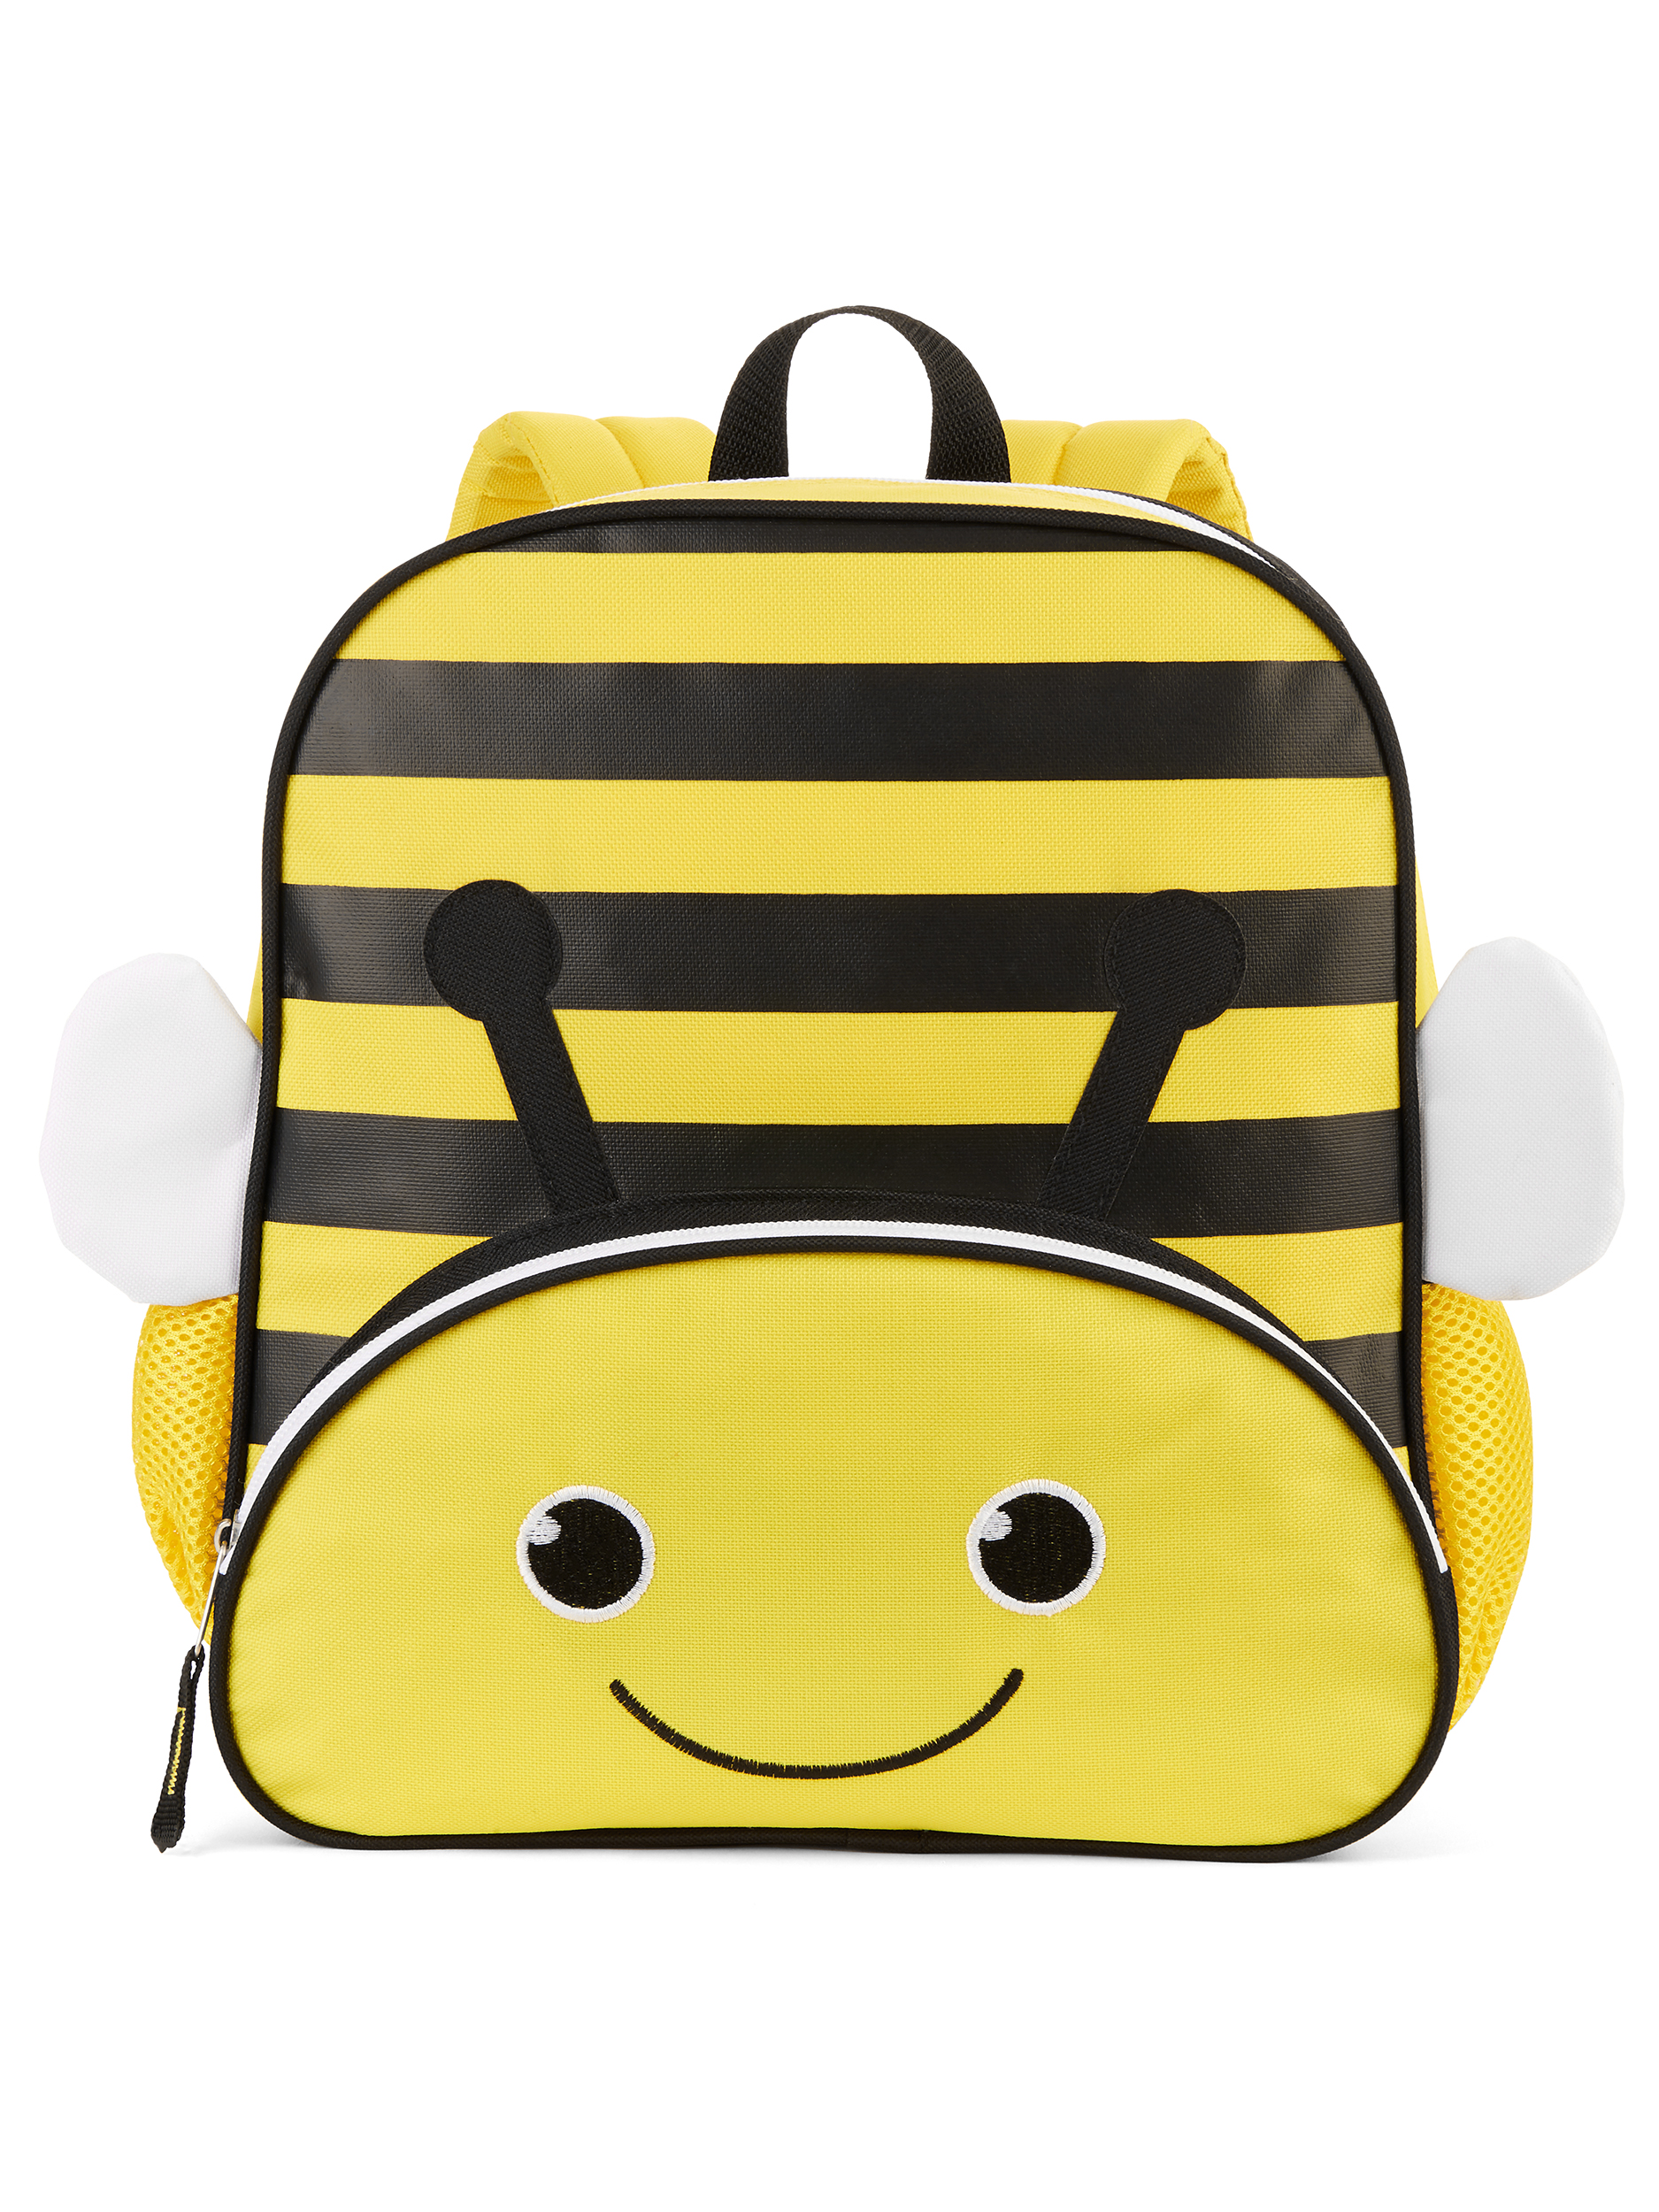 Wonder Nation Toddler Bumble Bee Critter Backpack - image 1 of 3